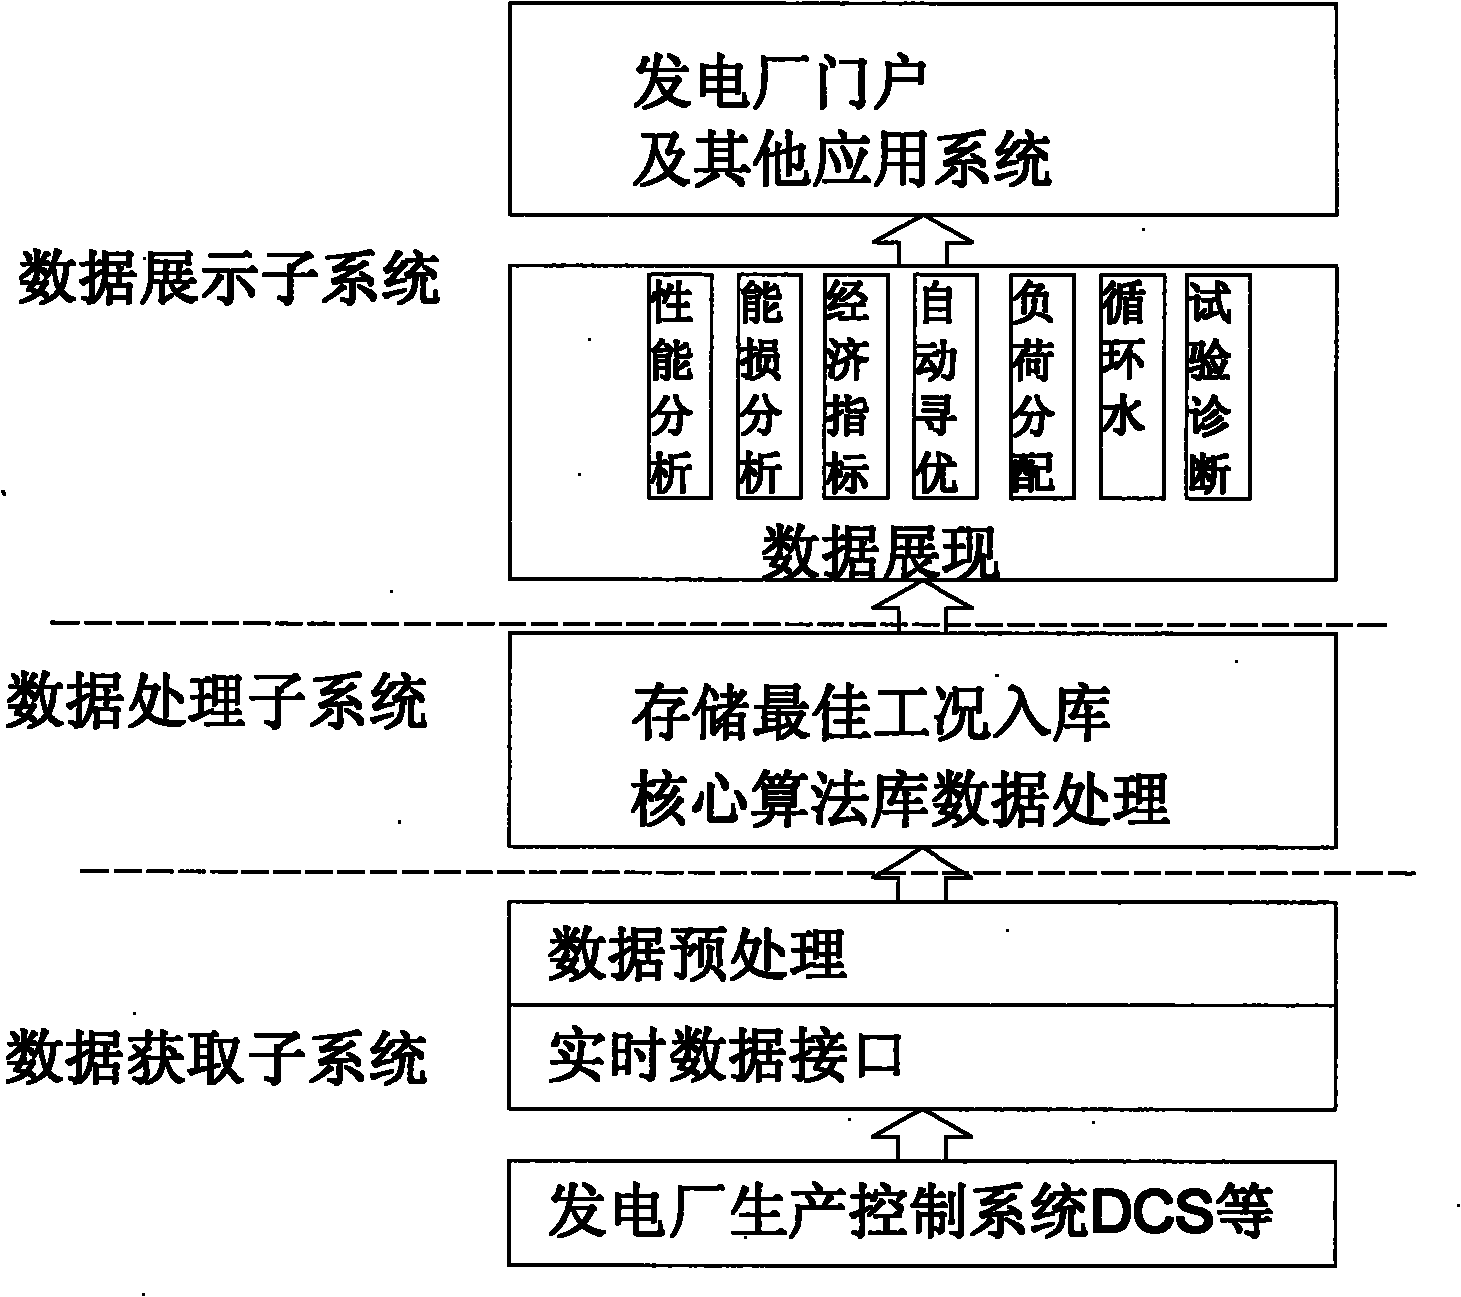 Optimization operational method based on energy consumption analysis for power plant and system thereof